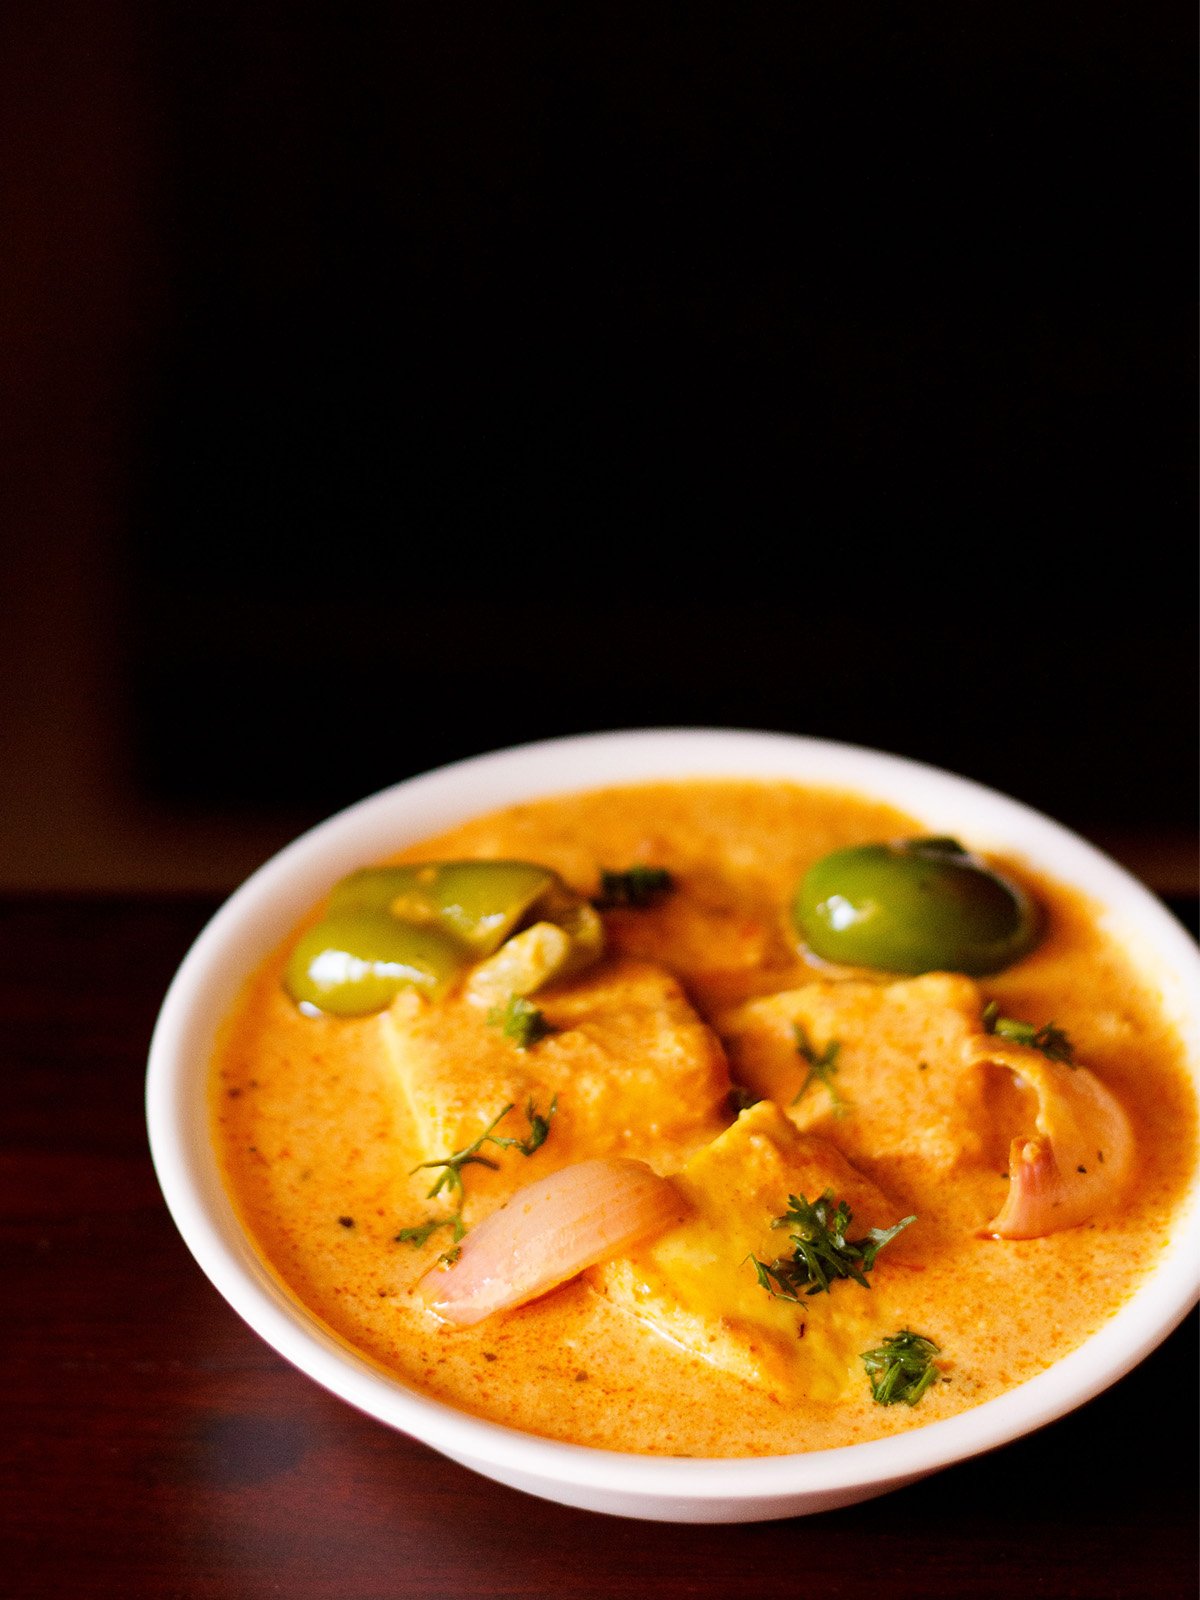 paneer tikka masala served in a white bowl garnished with some coriander leaves on a dark mahogany table.